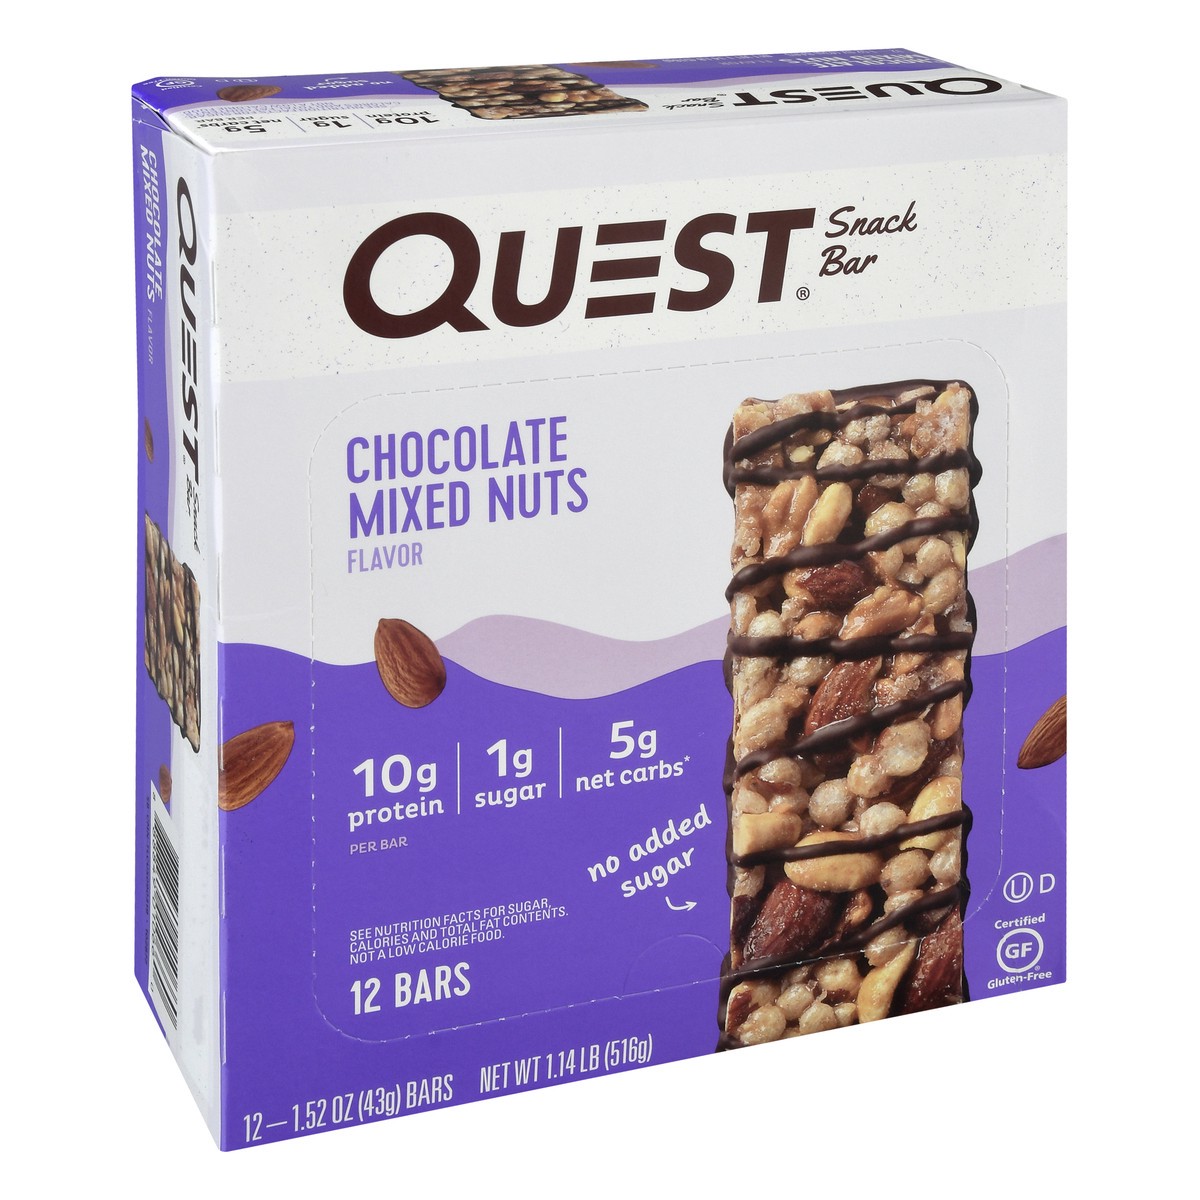 slide 9 of 13, Quest Chocolate Mixed Nuts Flavor Snack Bar 12 ea, 1 ct